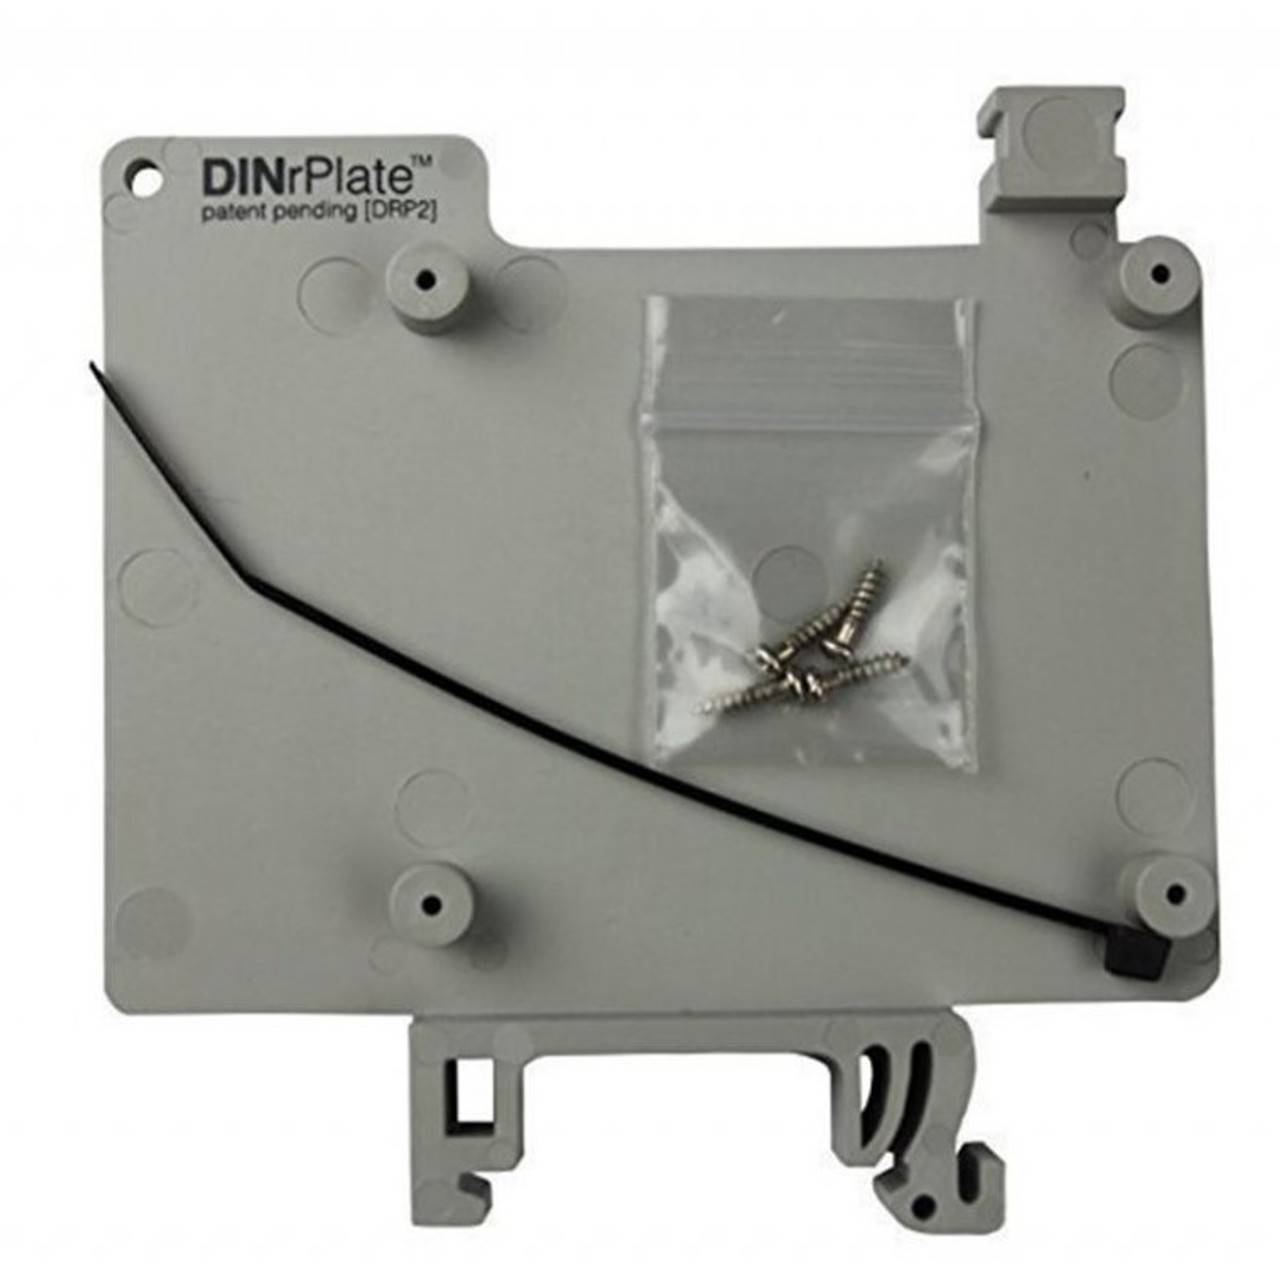 DIN RAIL・DIN RAIL MOUNTING PLATE・DIN RAIL END STOPPER, PRODUCTS